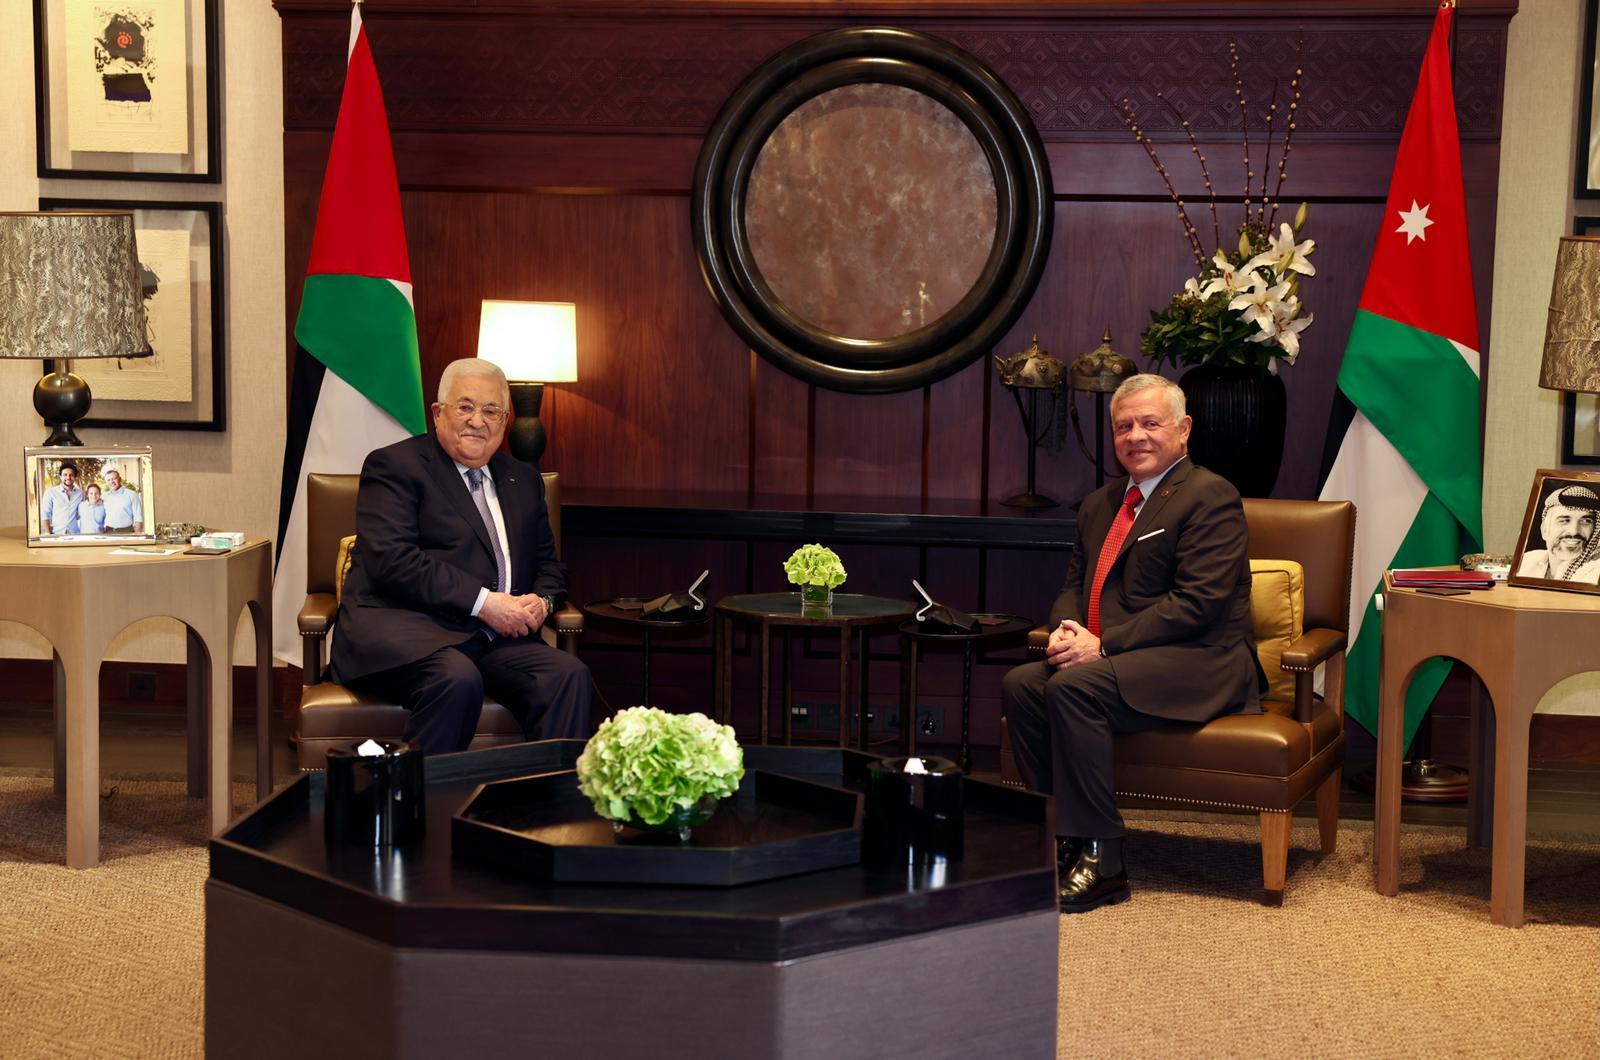 President Abbas arrives in Jordan, holds closed meeting with King Abdullah II